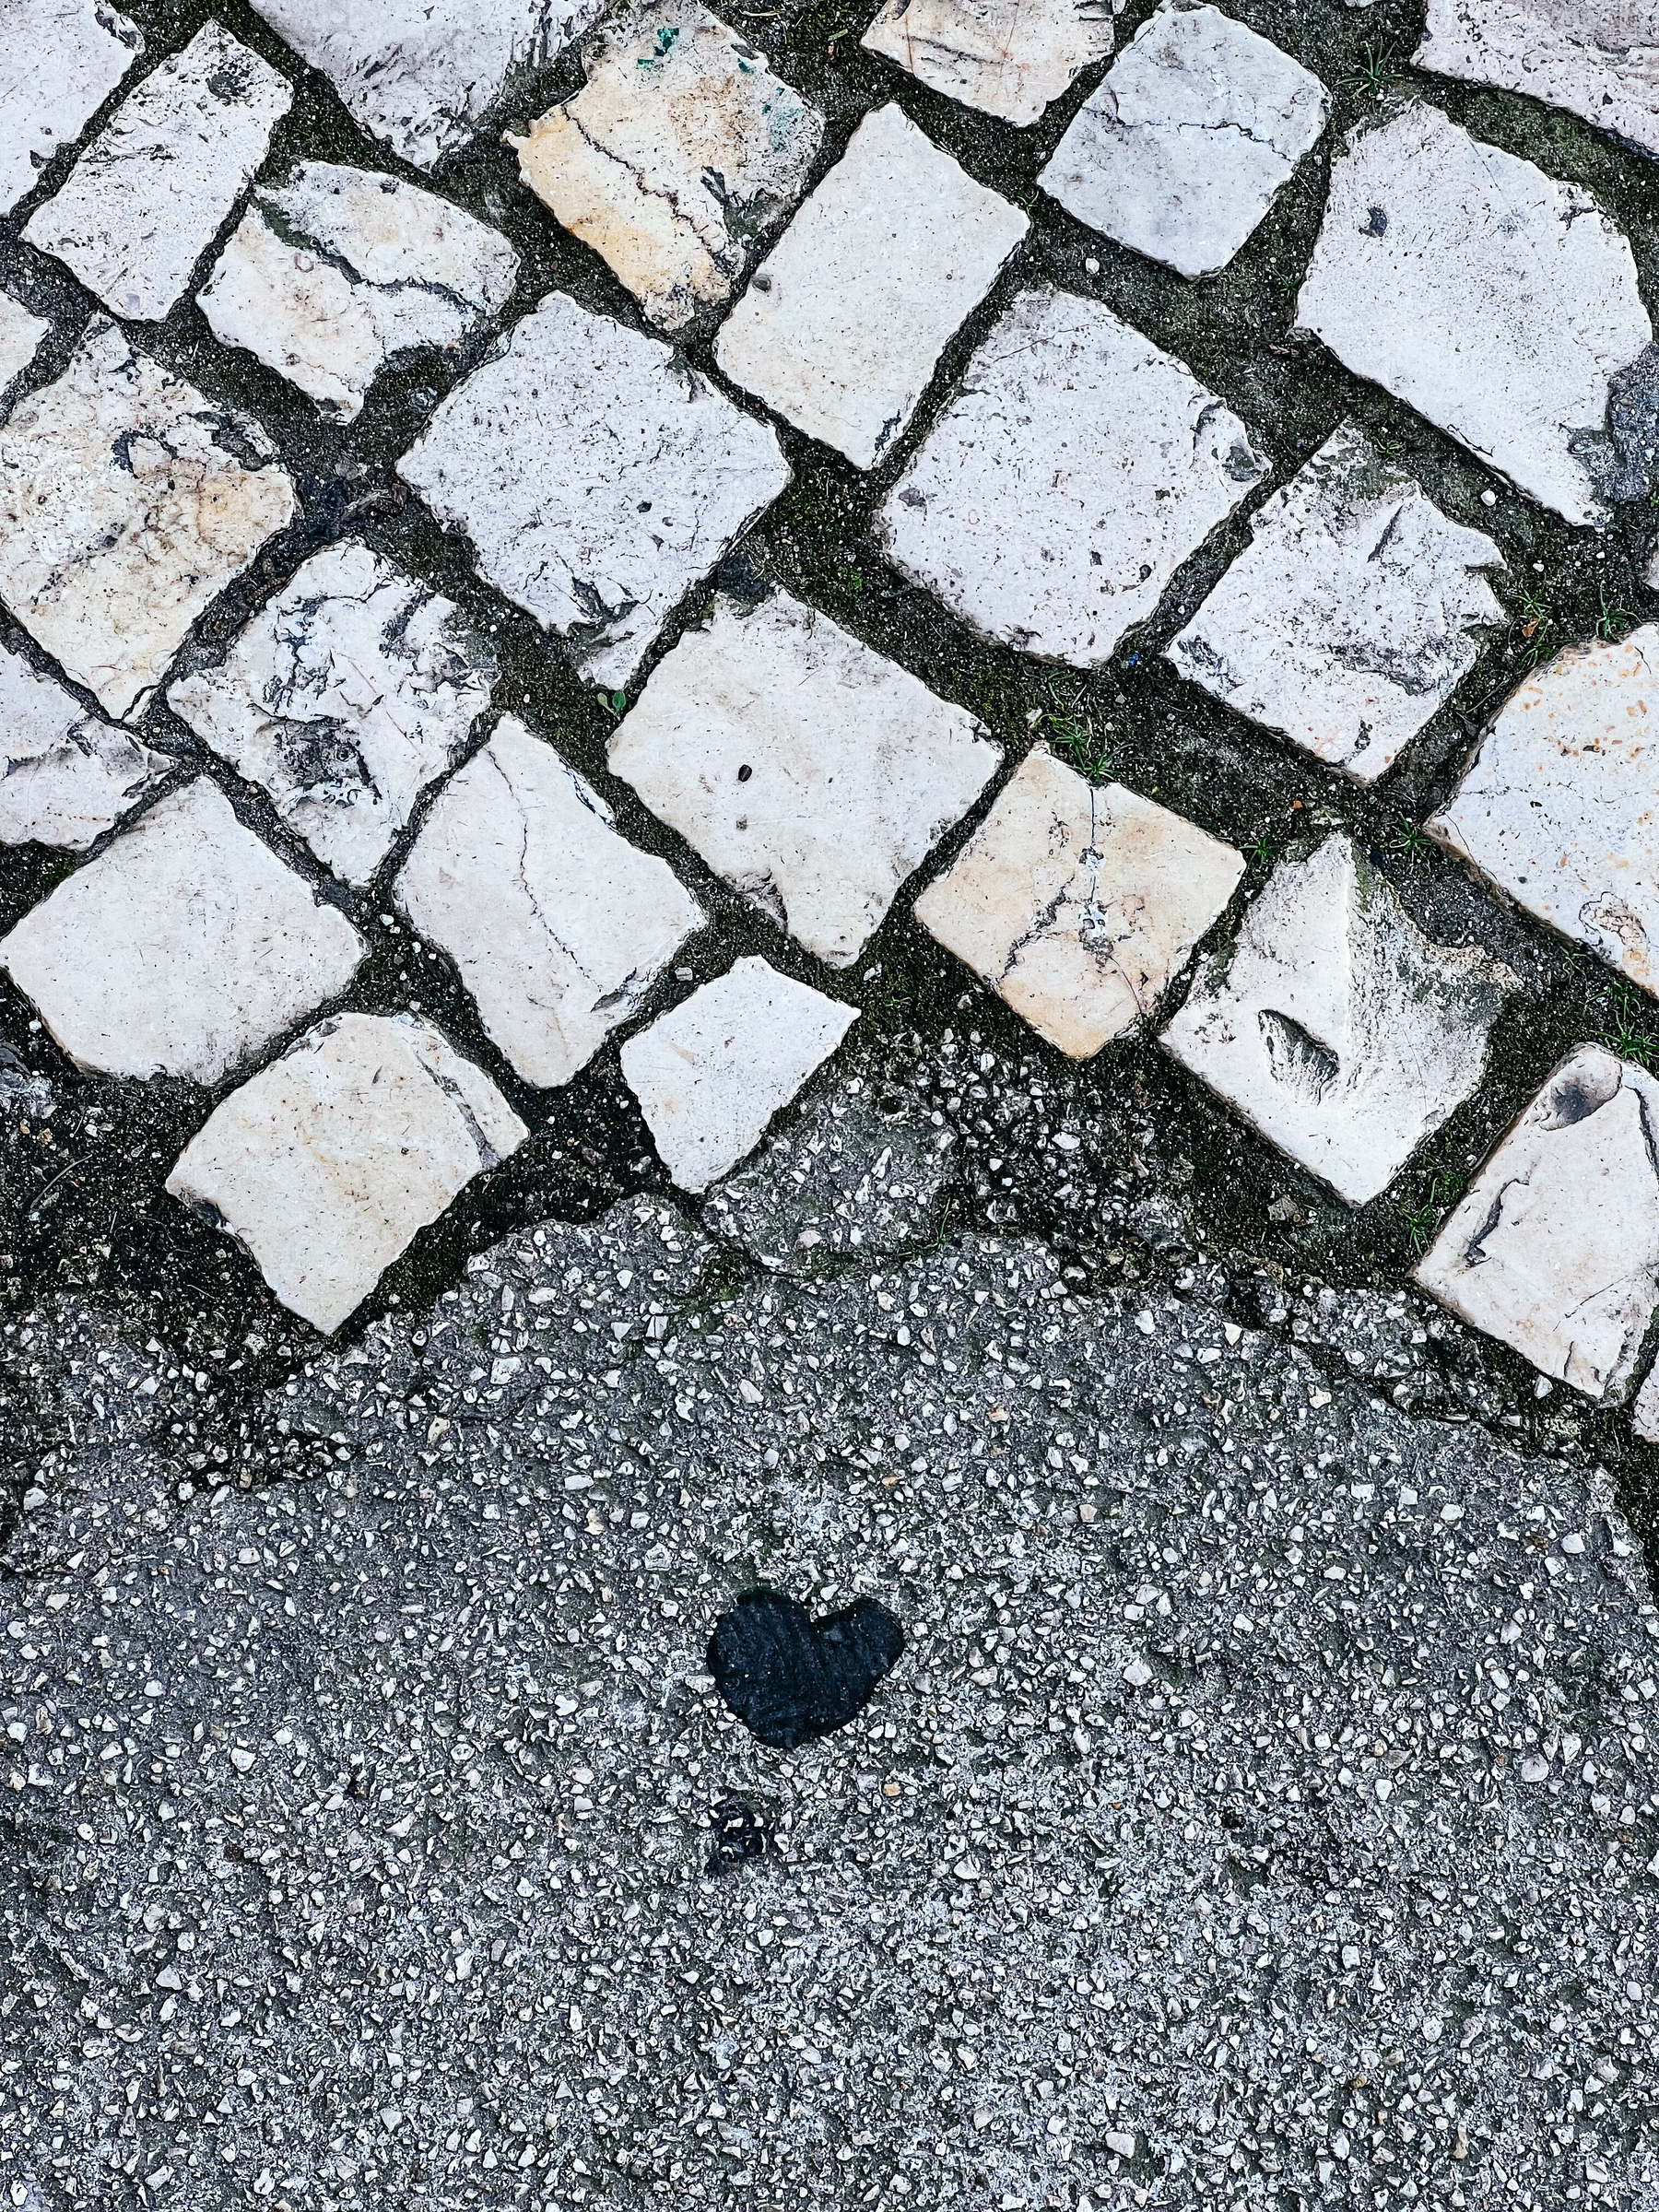 Looking down, pavement with a heart shaped piece of something. Gum?